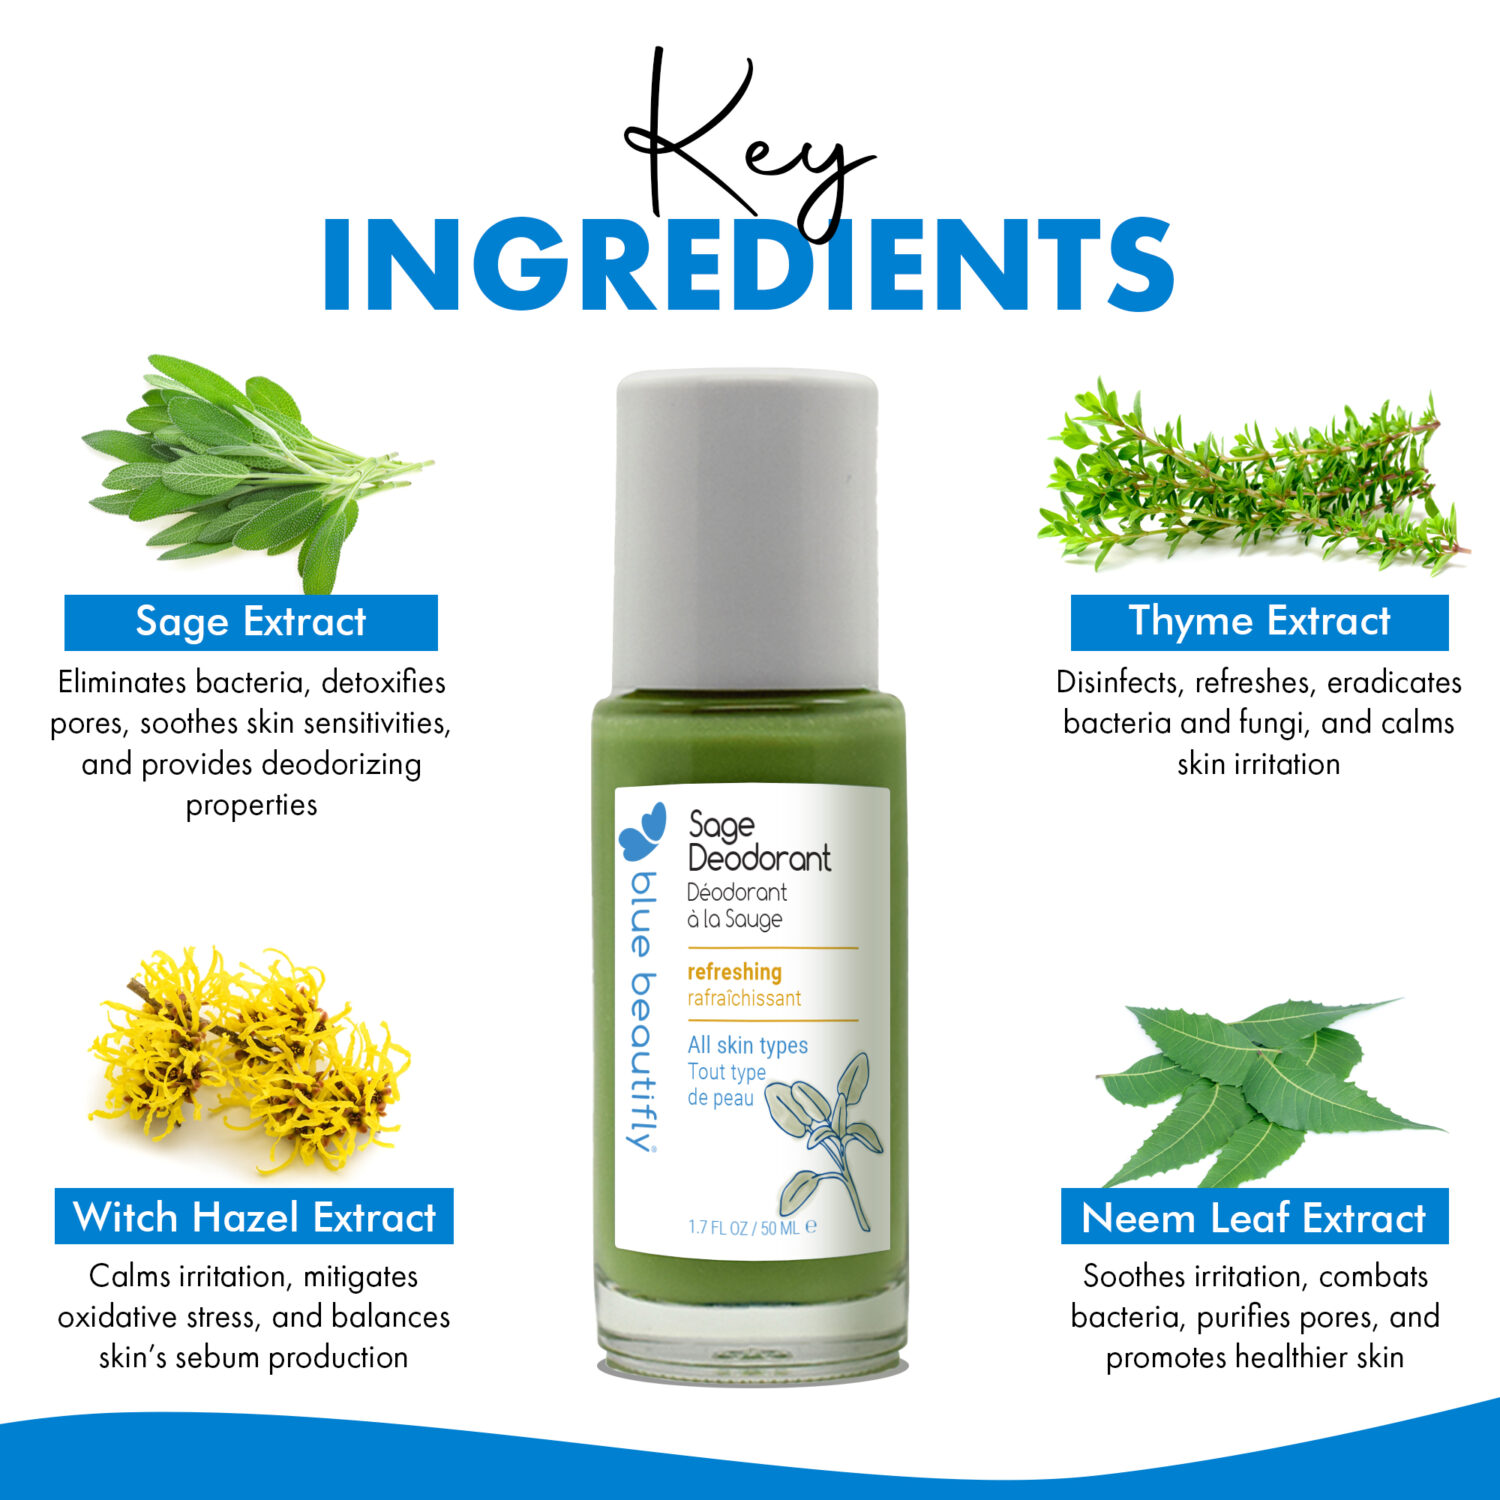 Blue Beautifly Sage Deodorant key ingredients are extracts of sage, thyme, witch hazel, and neem leaf